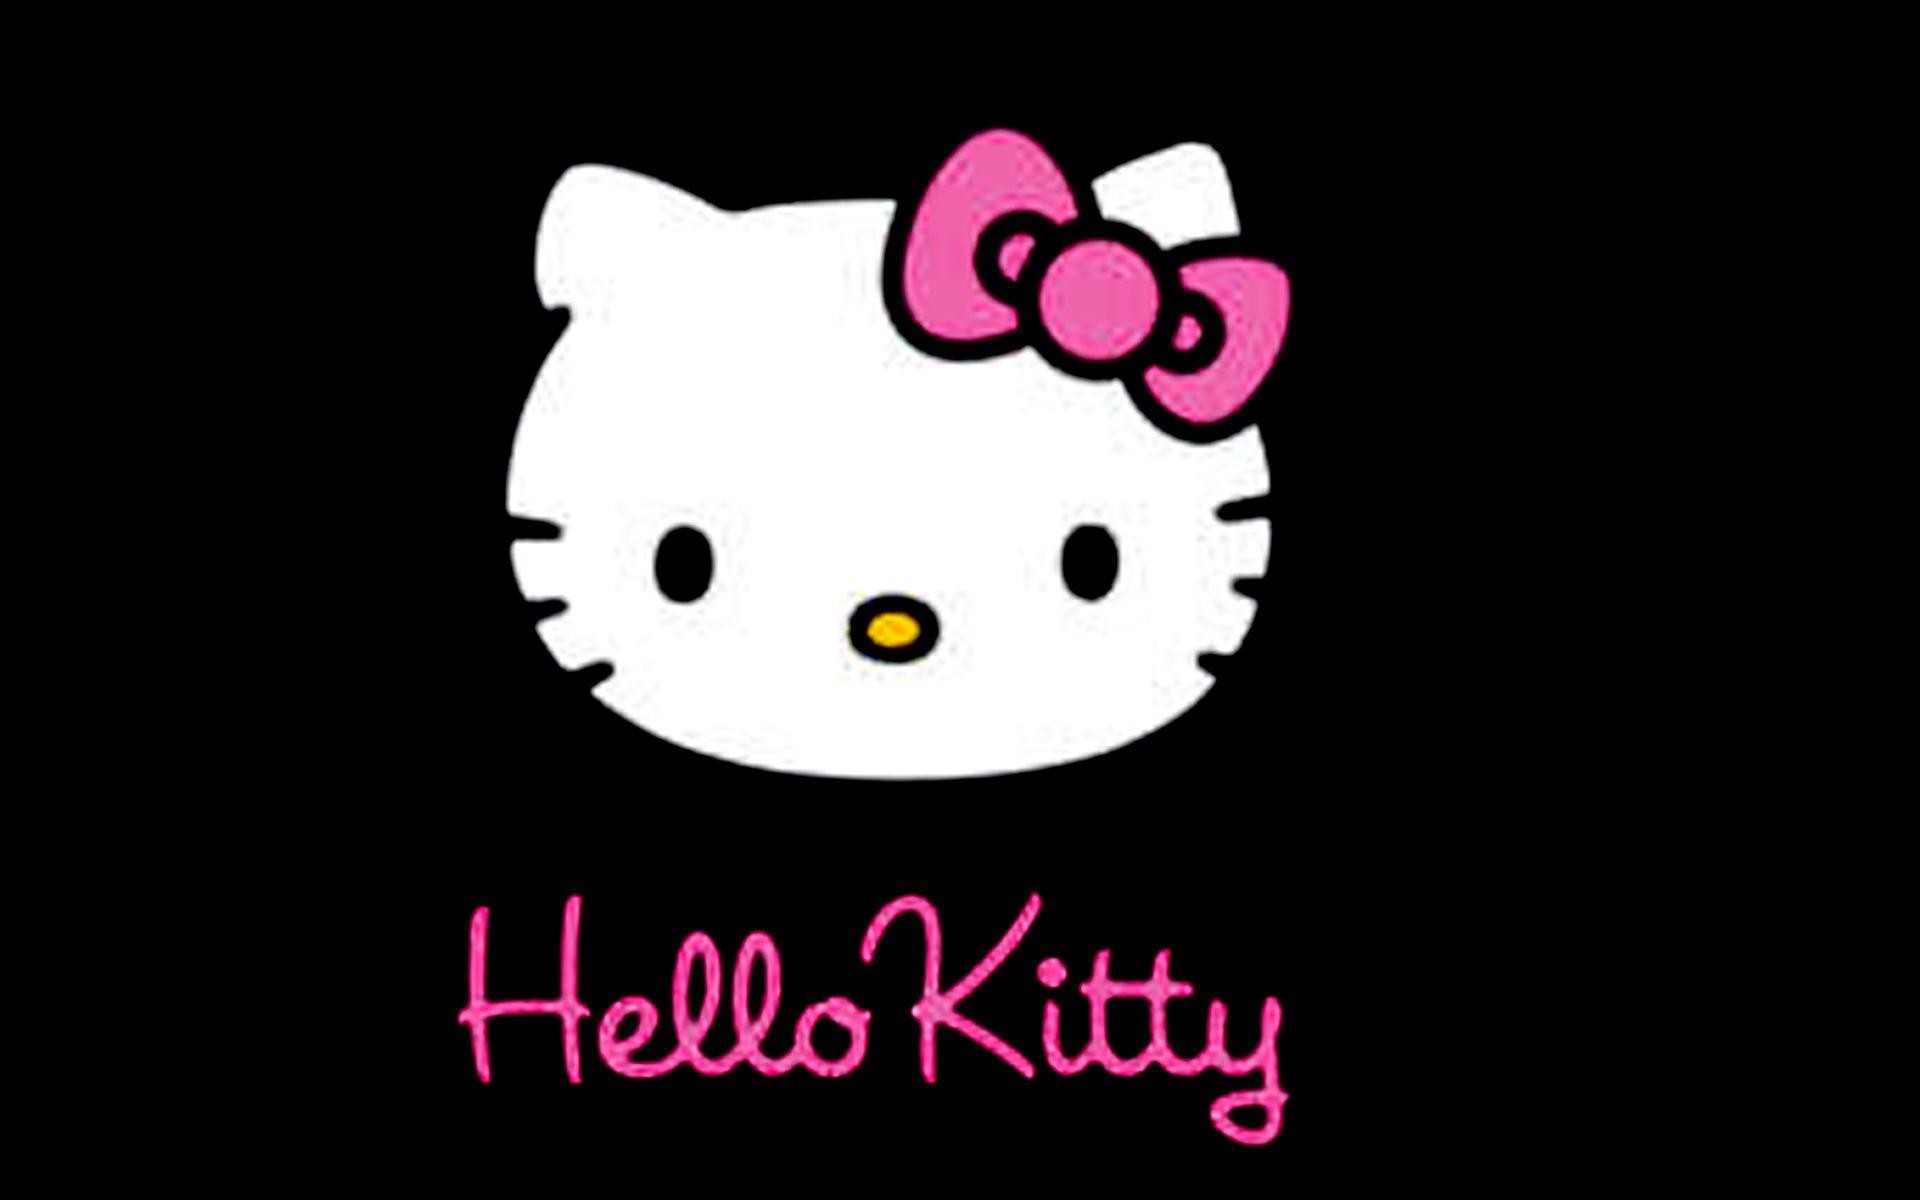 1920x1200 Hello Kitty Wallpaper Free For Computer | Cartoons Images